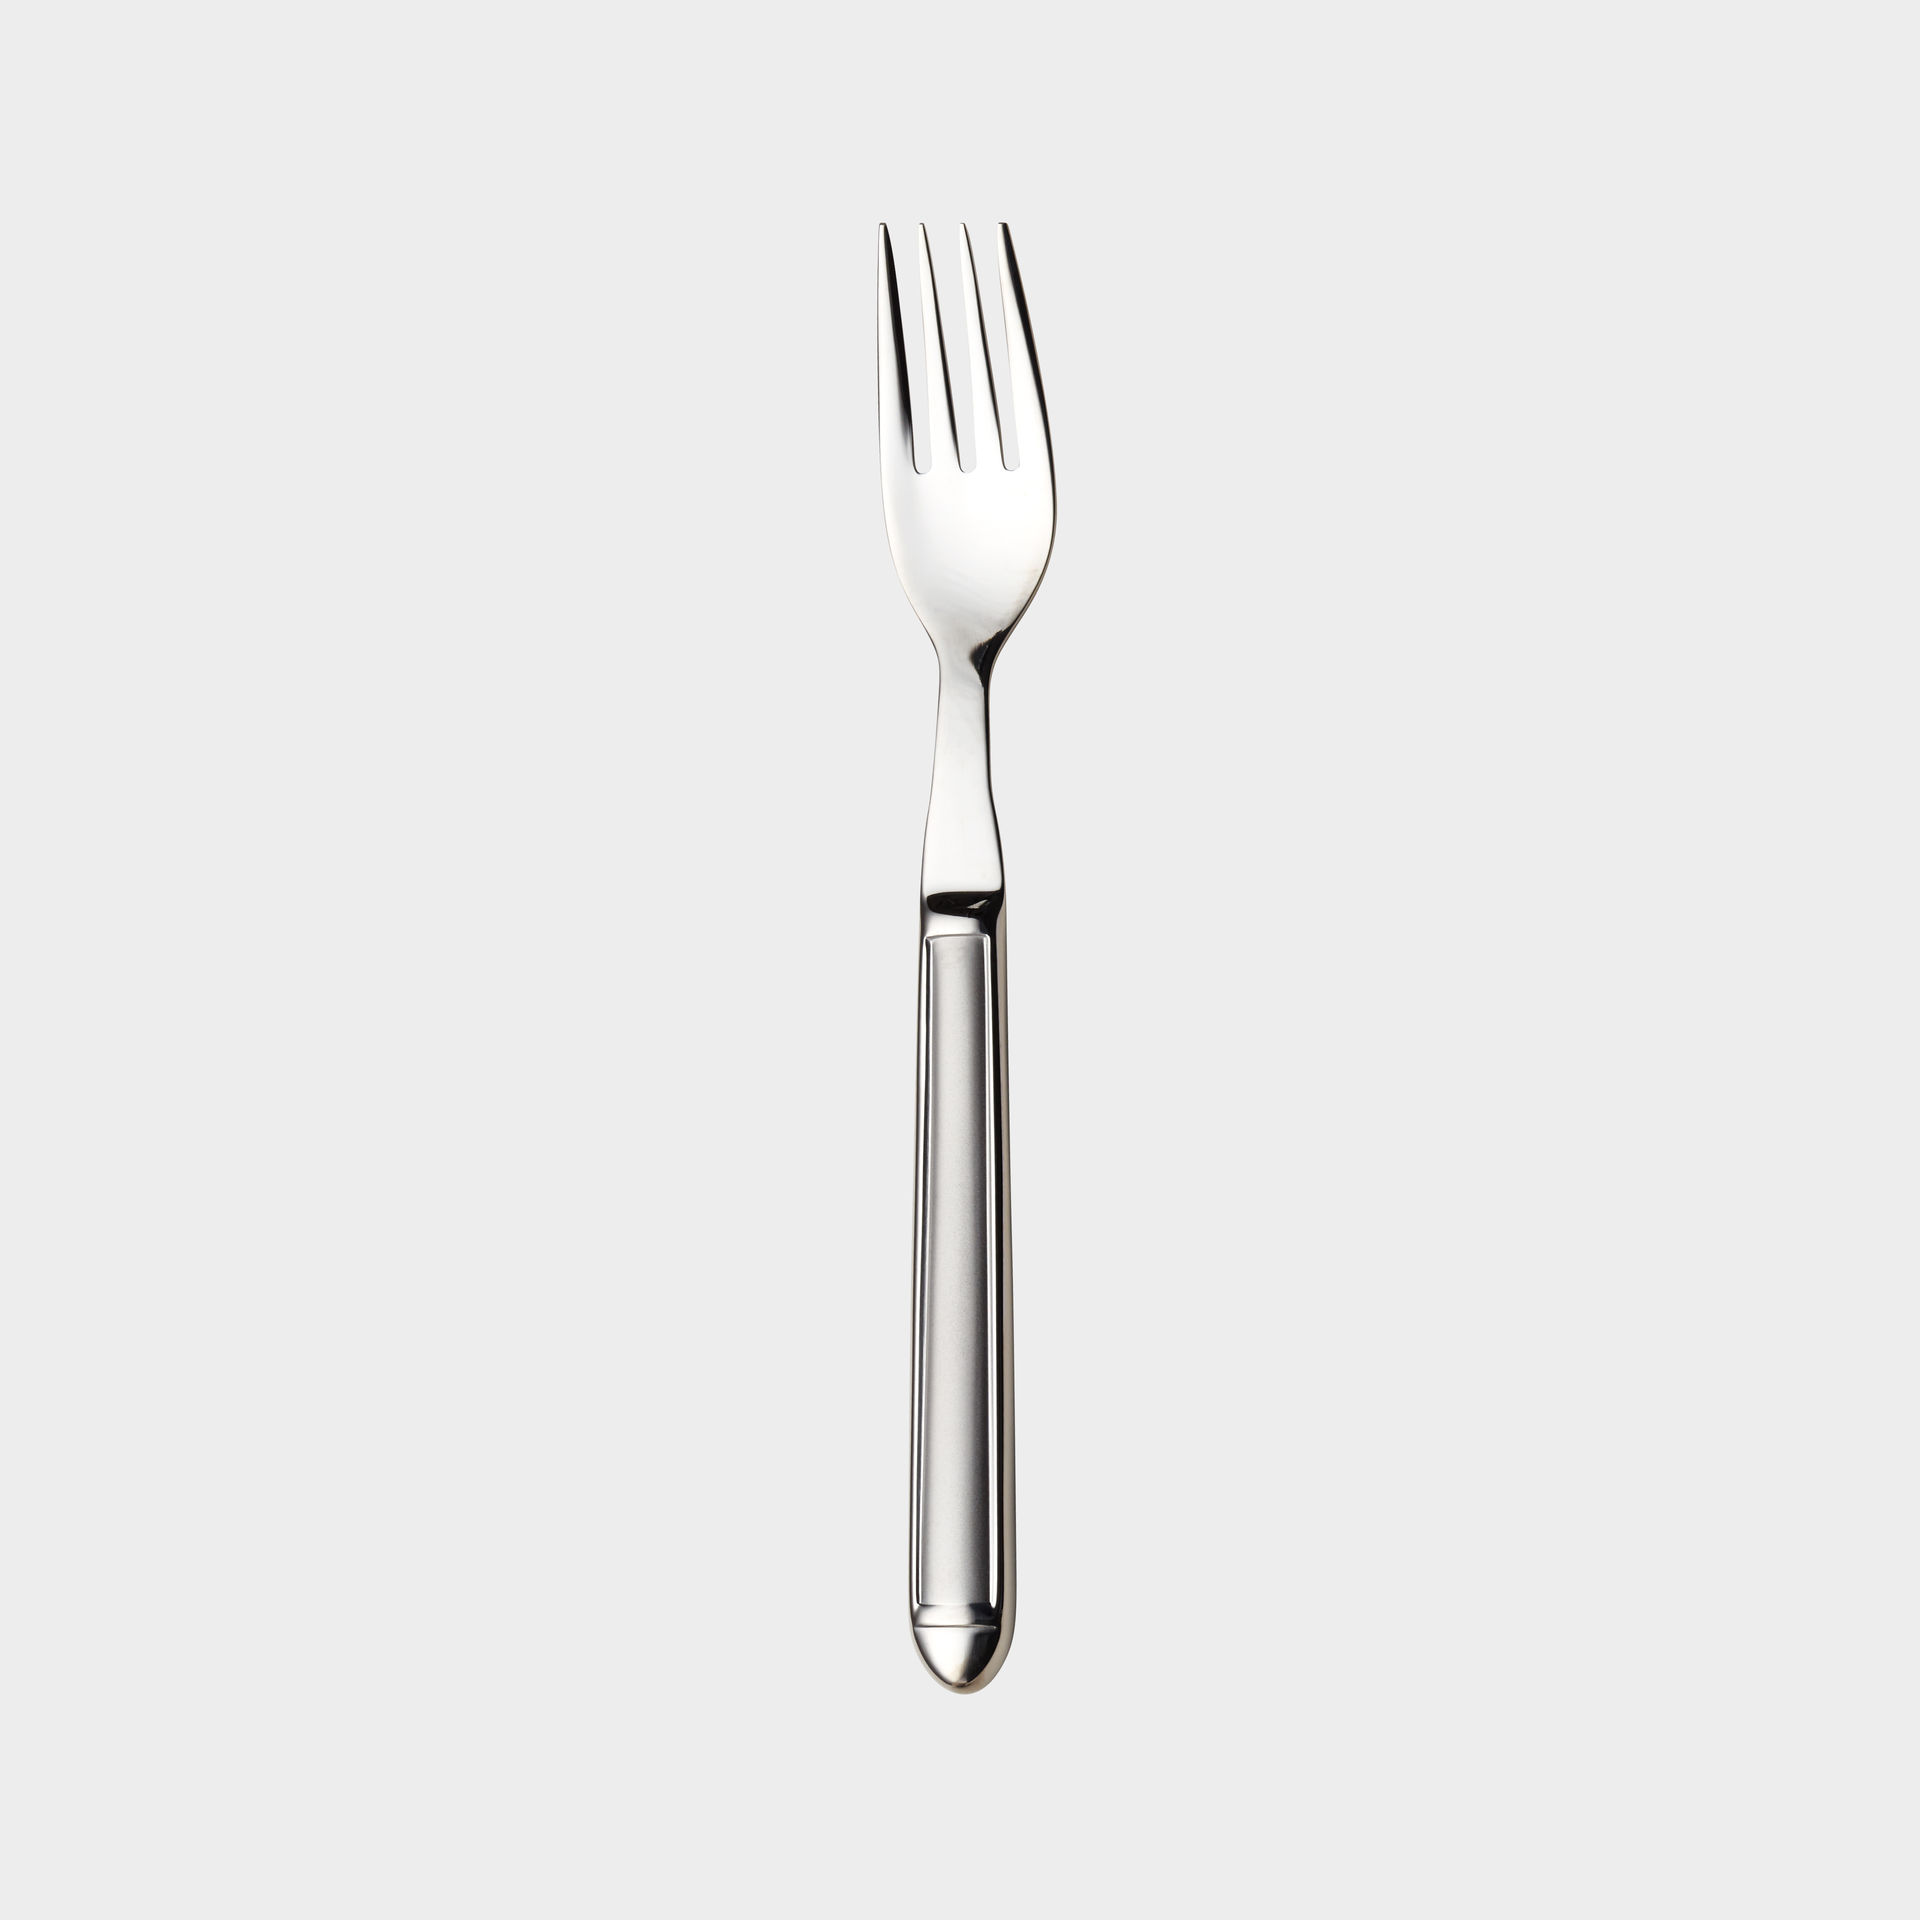 Nora dinner fork product image